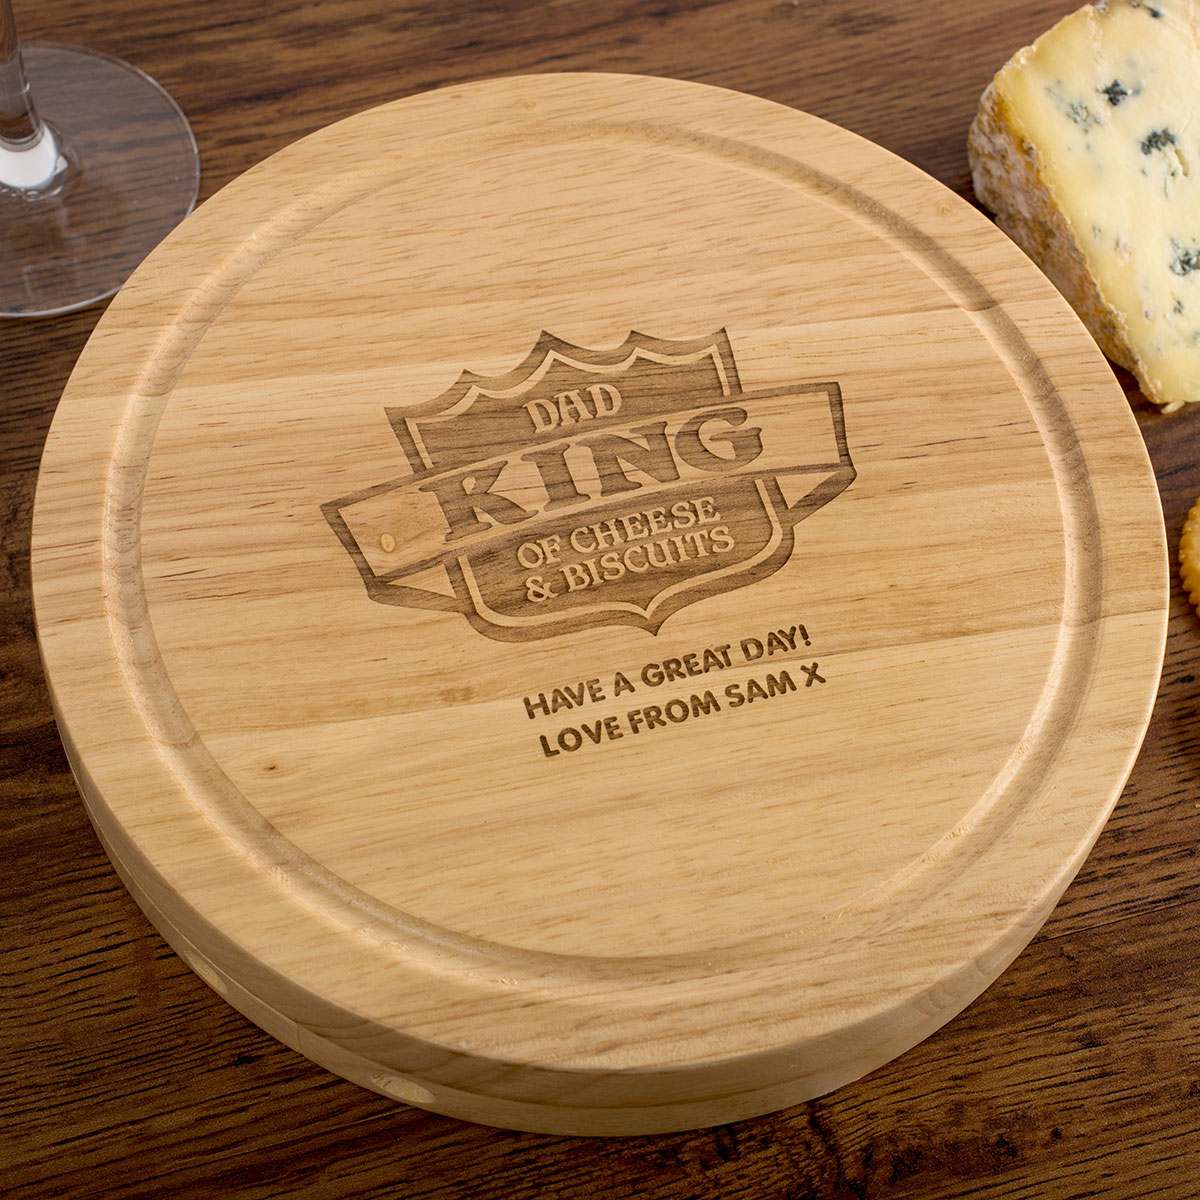 Personalised Wooden Cheeseboard Set - Dad, King Of Cheese & Biscuits